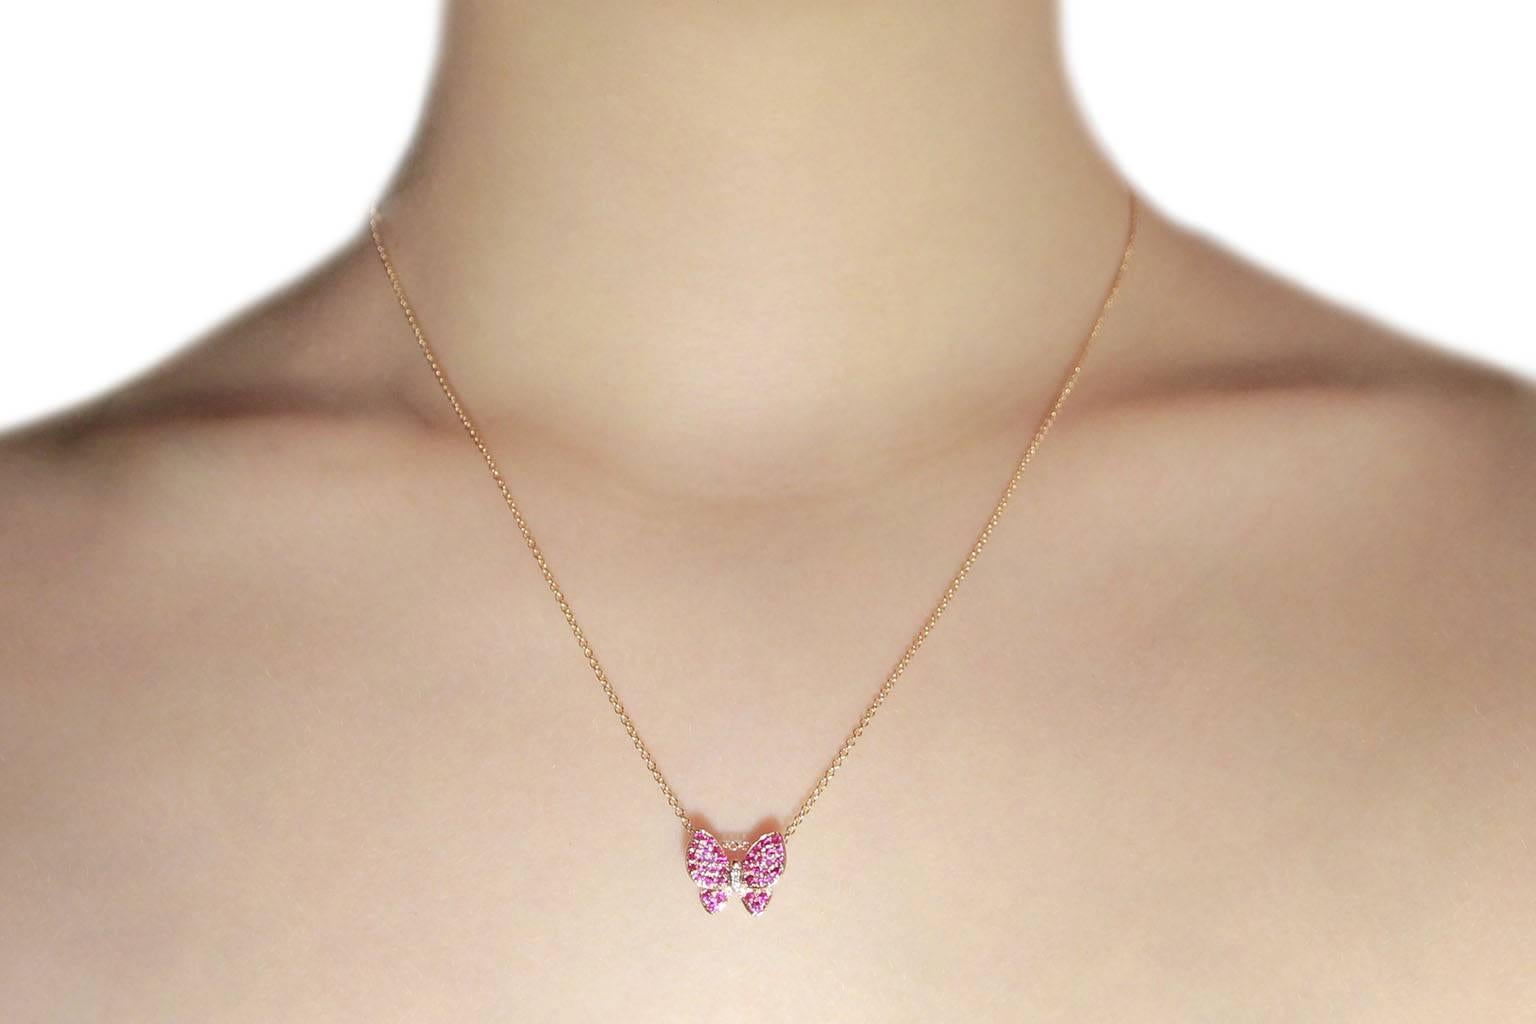 Jona design collection, hand crafted in Italy, butterfly pendant in 18 karat rose gold  set with 0.38 carats of pink sapphires and 0.01ct. of white diamonds  and mounted on a 18 karat rose gold chain, 17.71 inch long. 
All Jona jewelry is new and